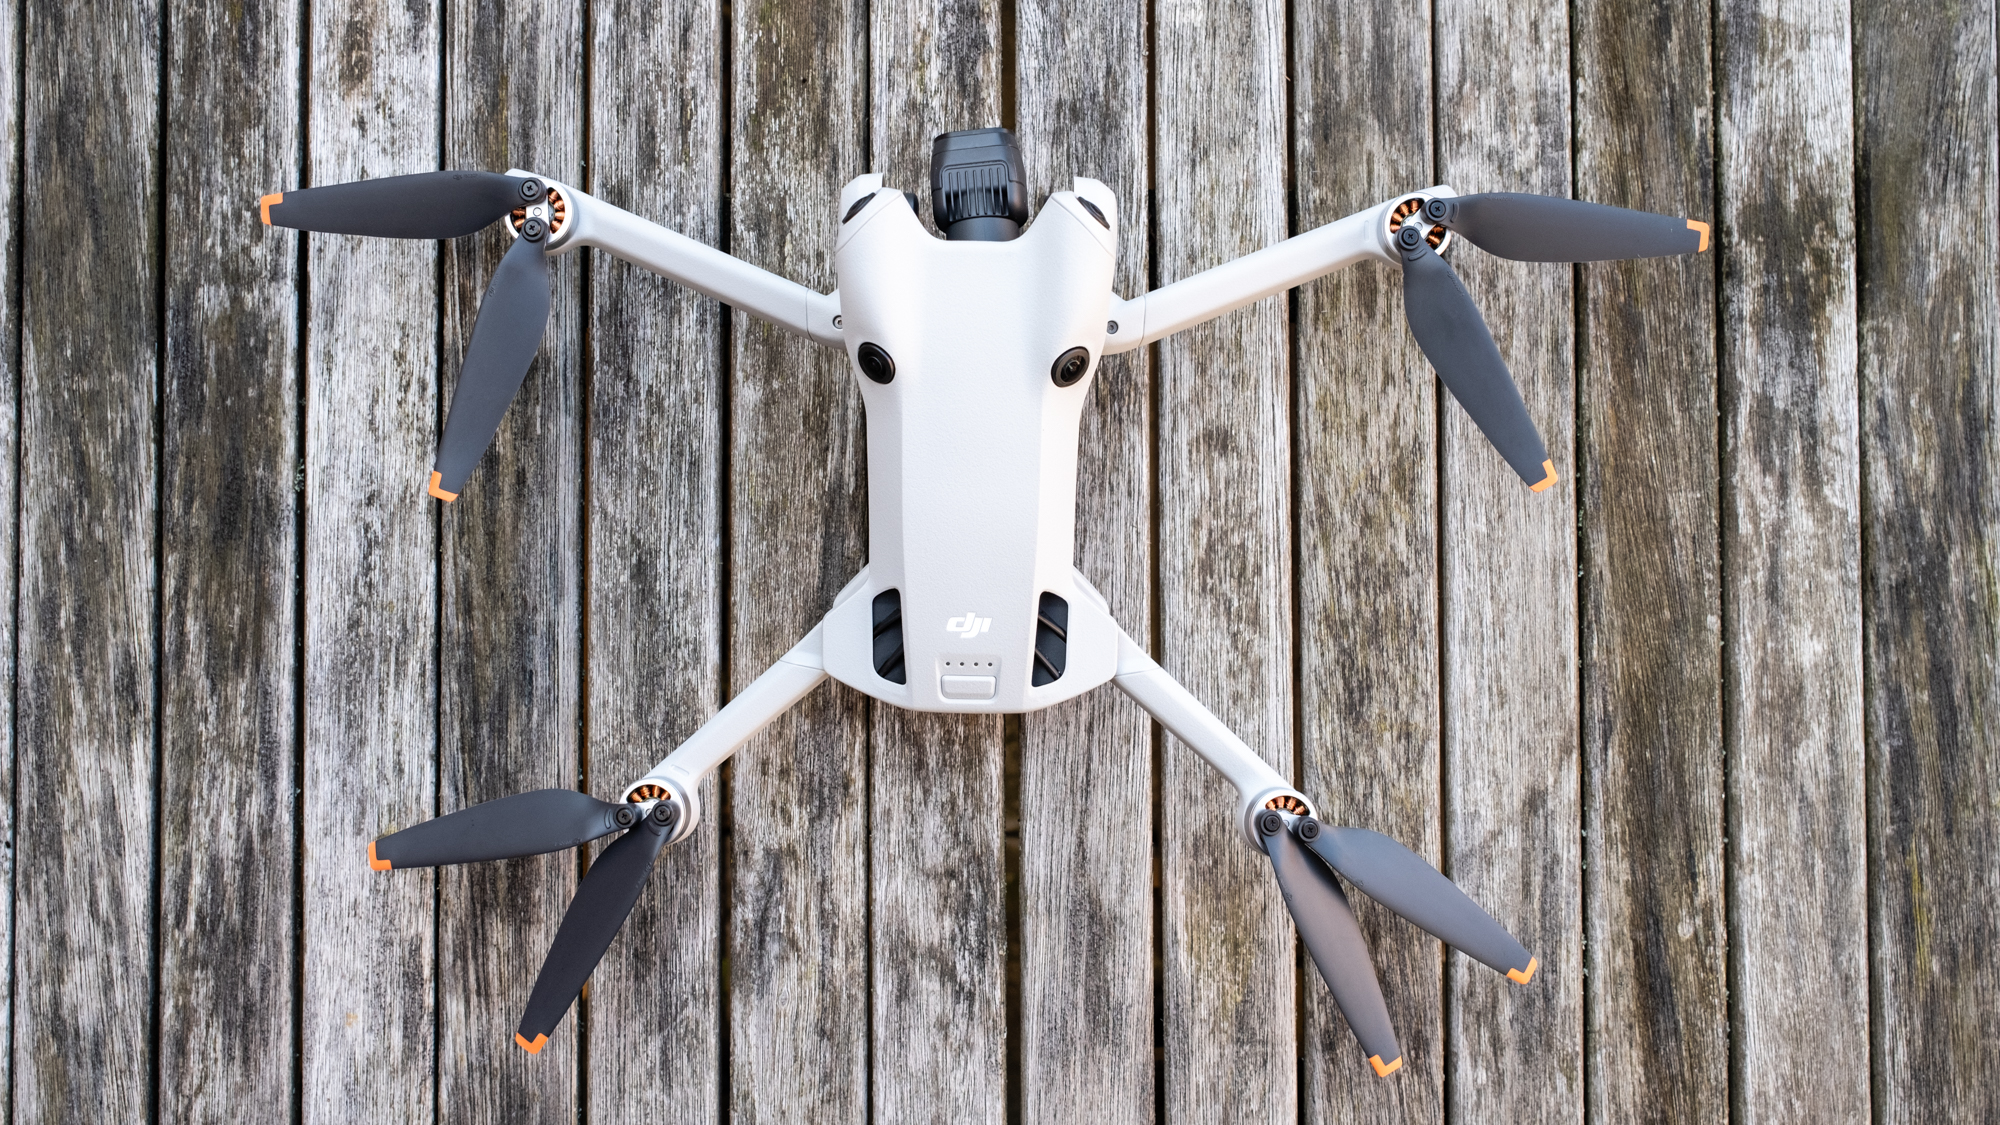 A top-down view of a white DJI Mini 4 Pro drone with its propellers out sitting on wooden slats.